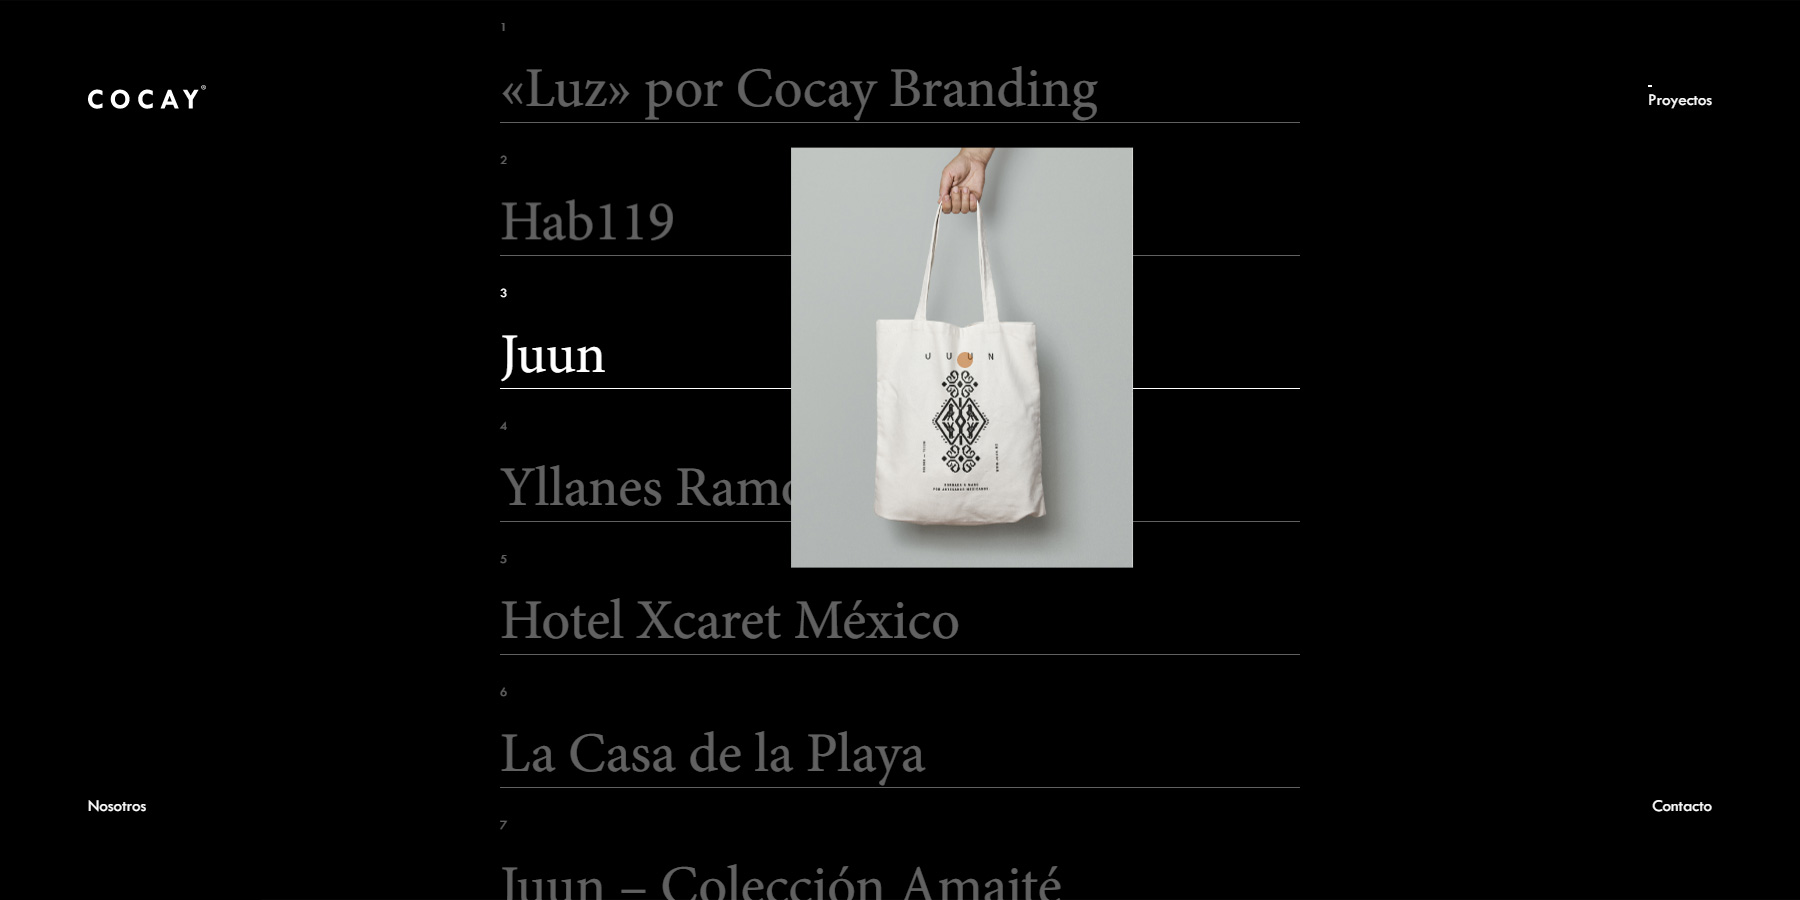 Cocay Branding - Website of the Day